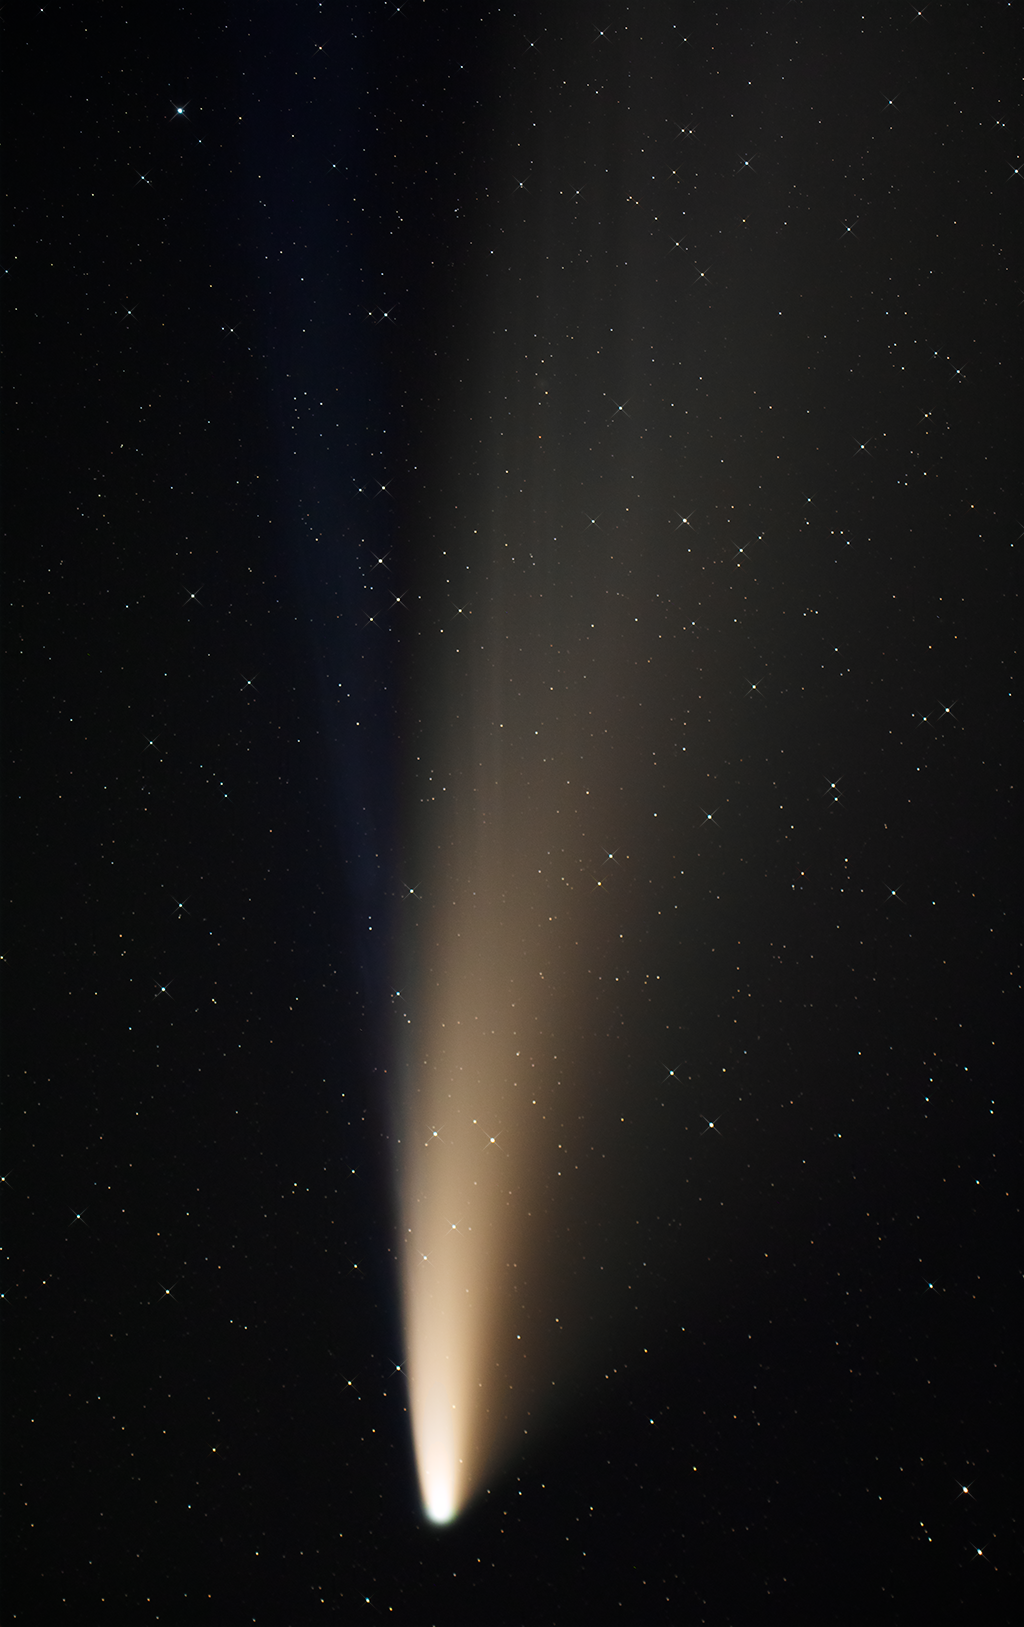 Comet C/2020 F3 (NEOWISE) in the evening sky over the Mojave Desert (Landers, California). Click the image for a larger version.